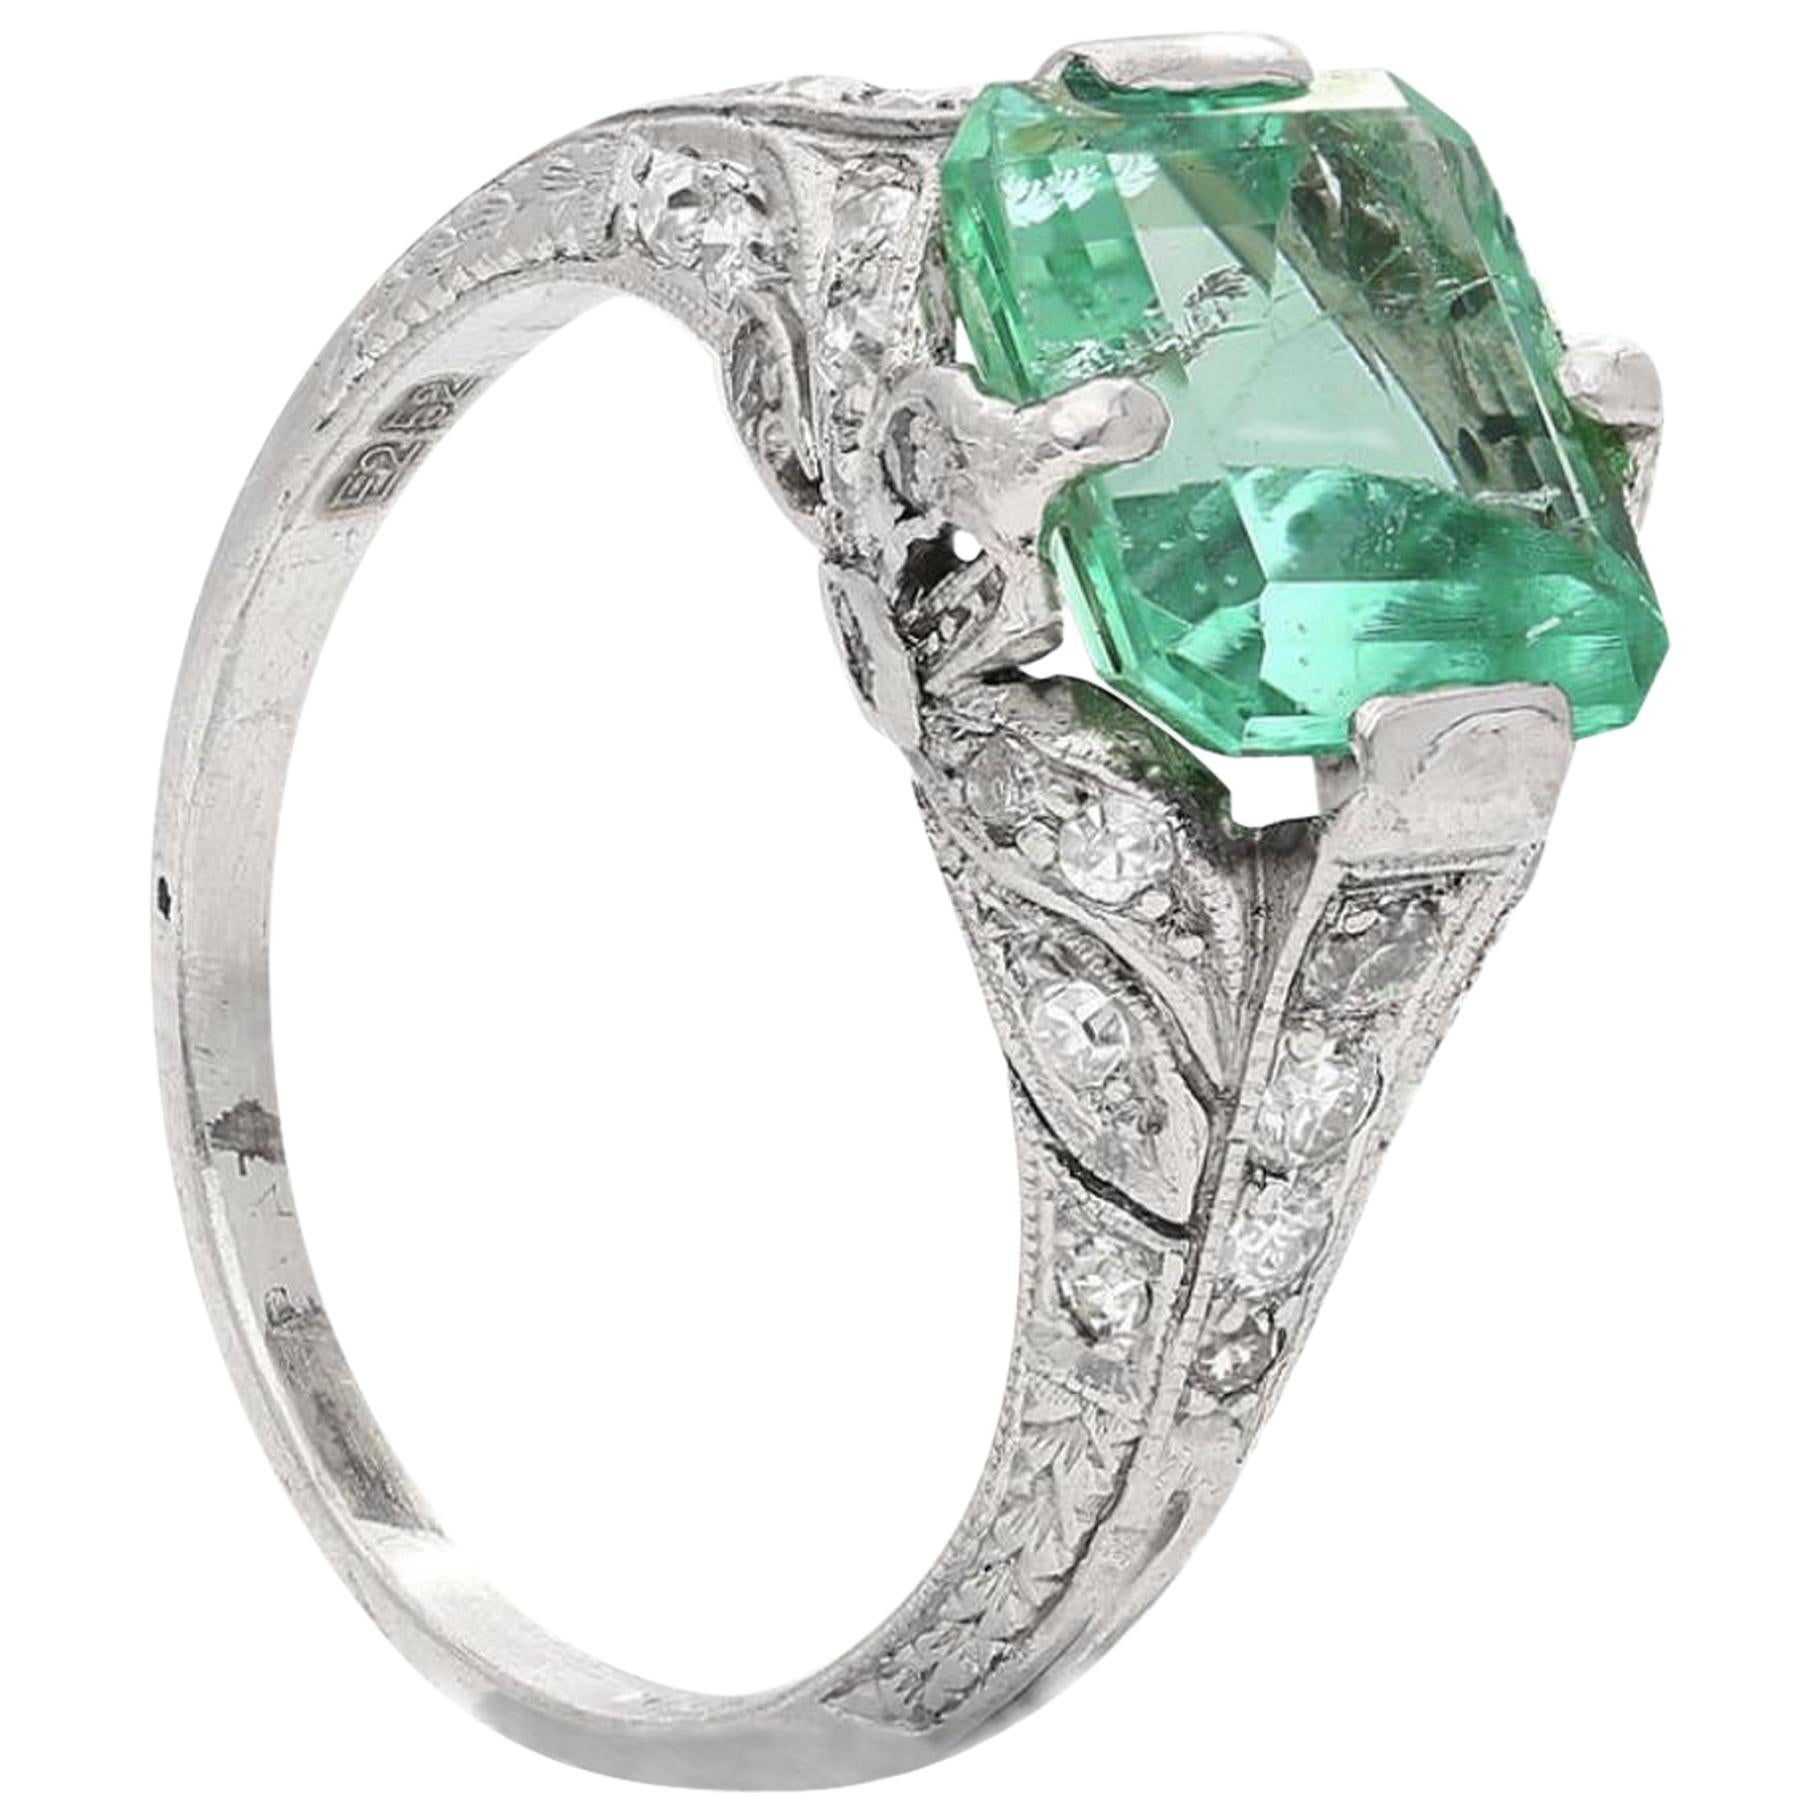 2.52 Carat Art Deco Colombian Emerald and Diamond Engagement Ring